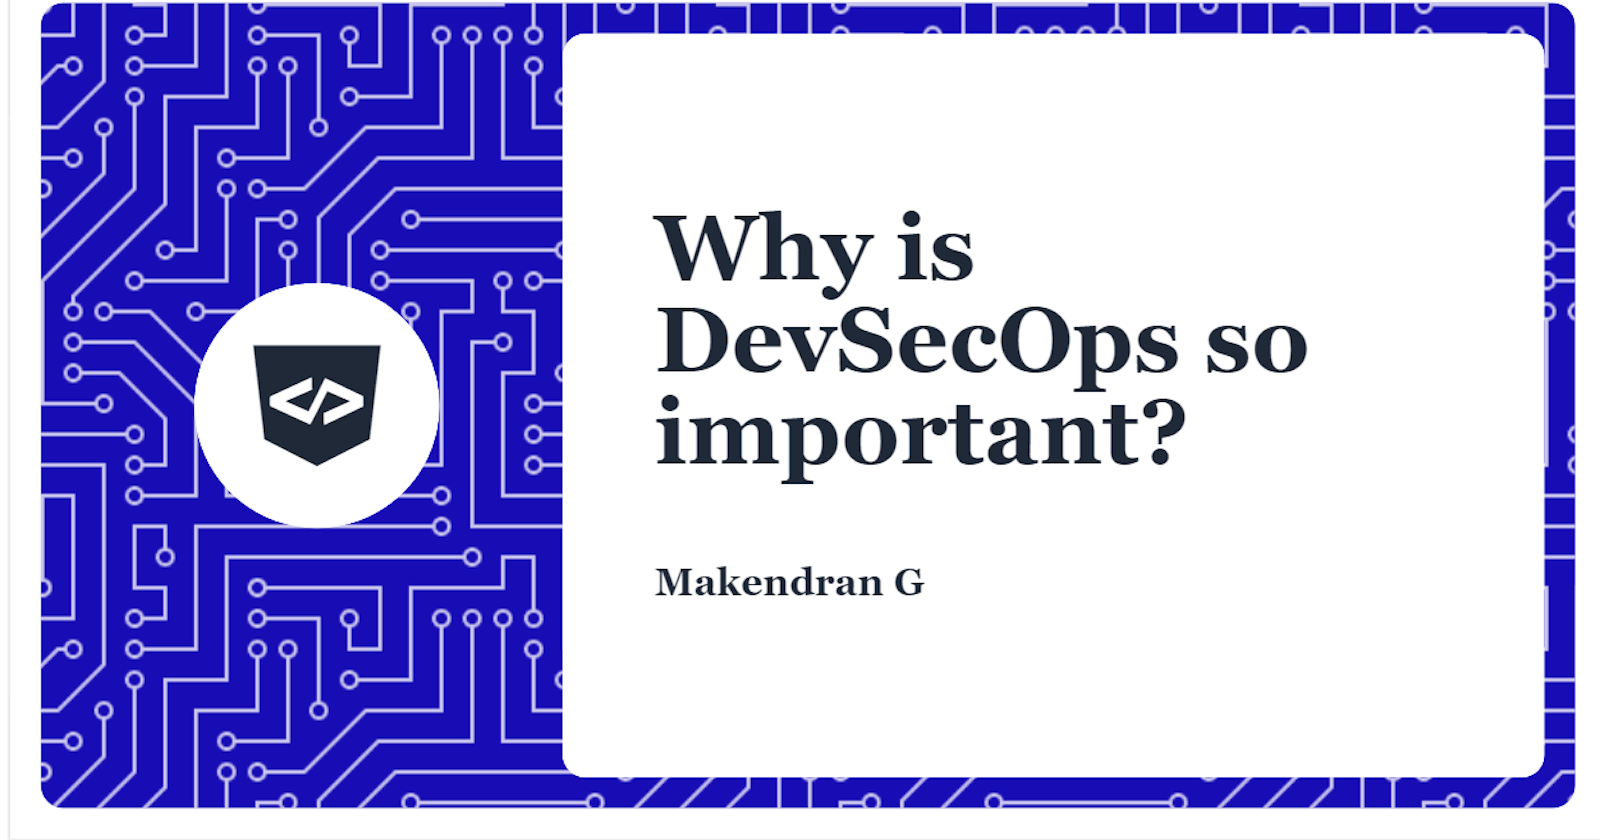 Why is DevSecOps so important?